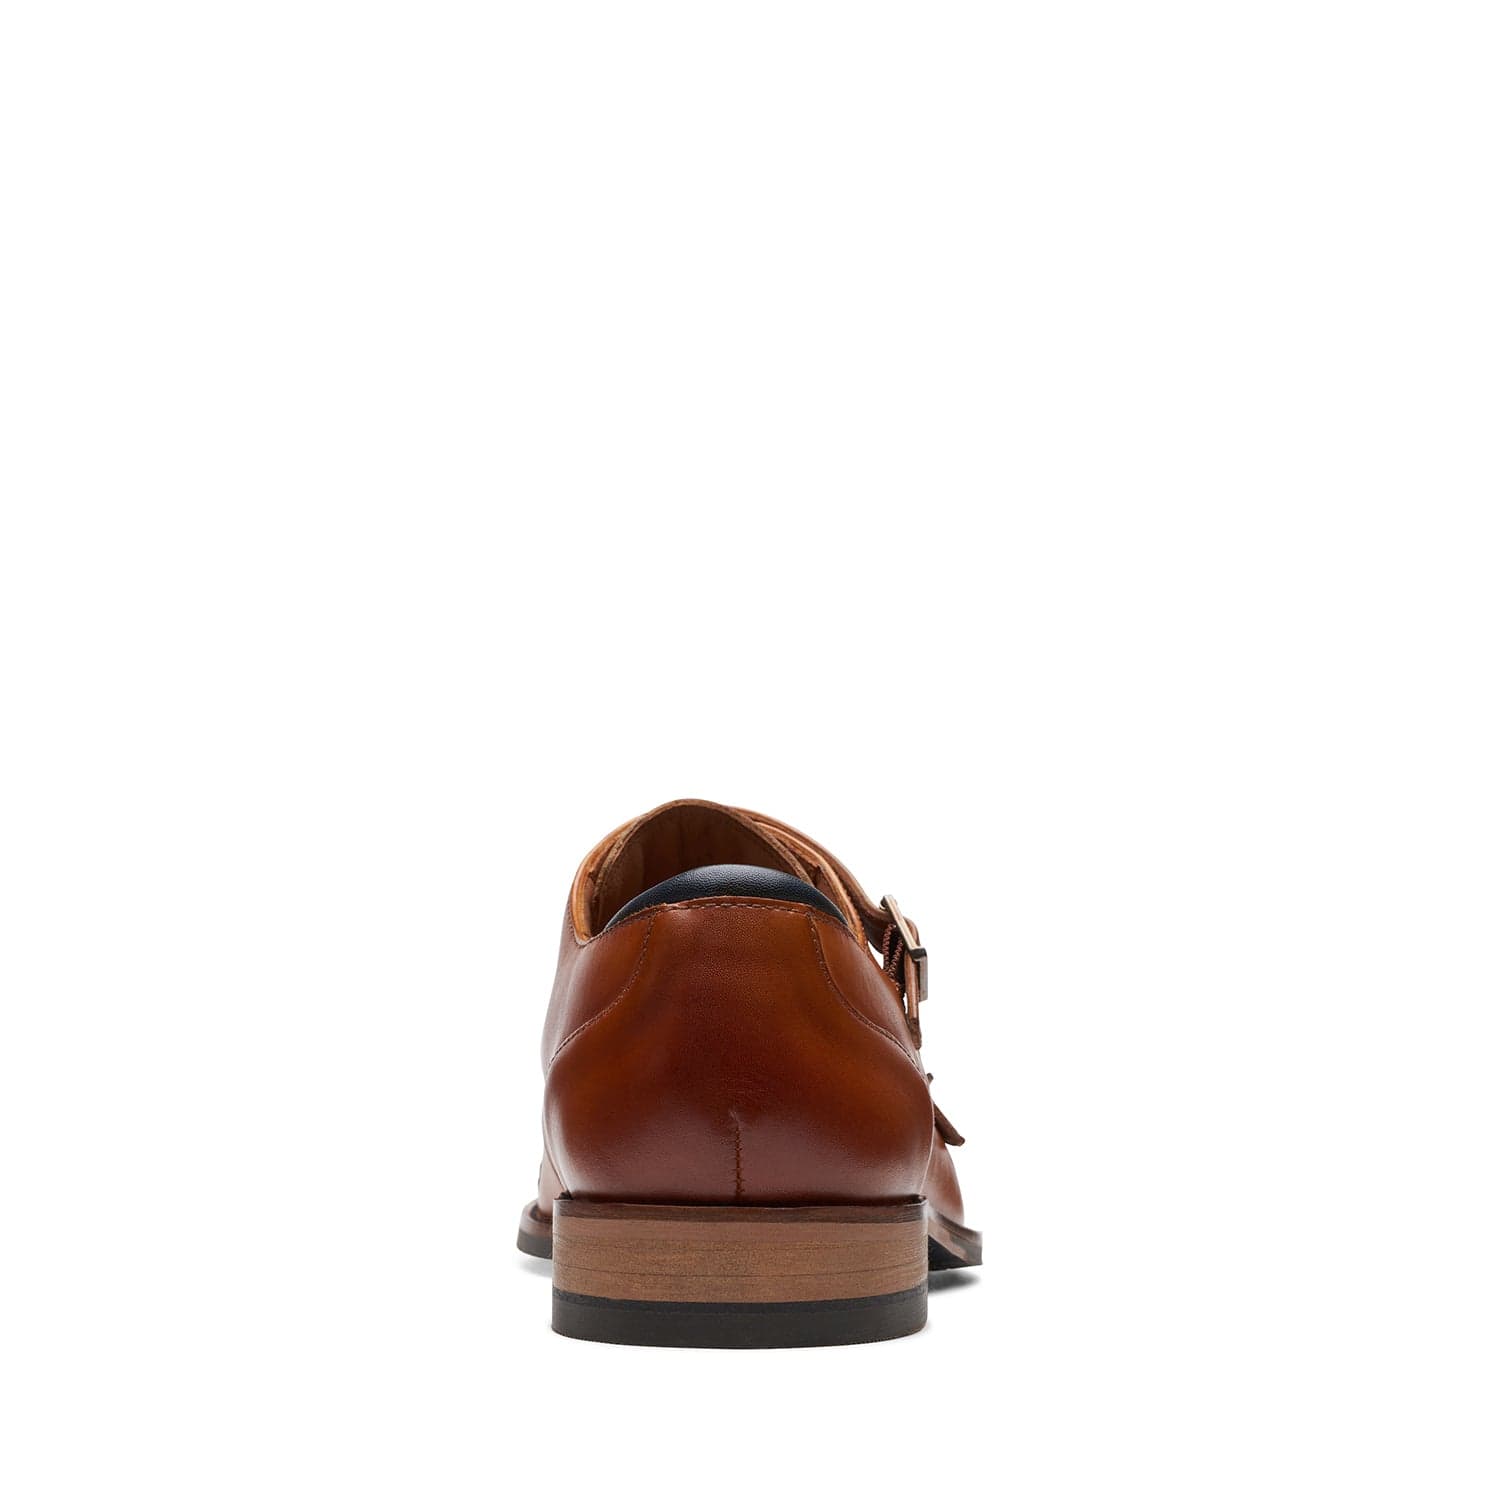 Clarks Craftarlo Monk - Shoes - Tan Leather - 261724527 - G Width (Standard Fit)